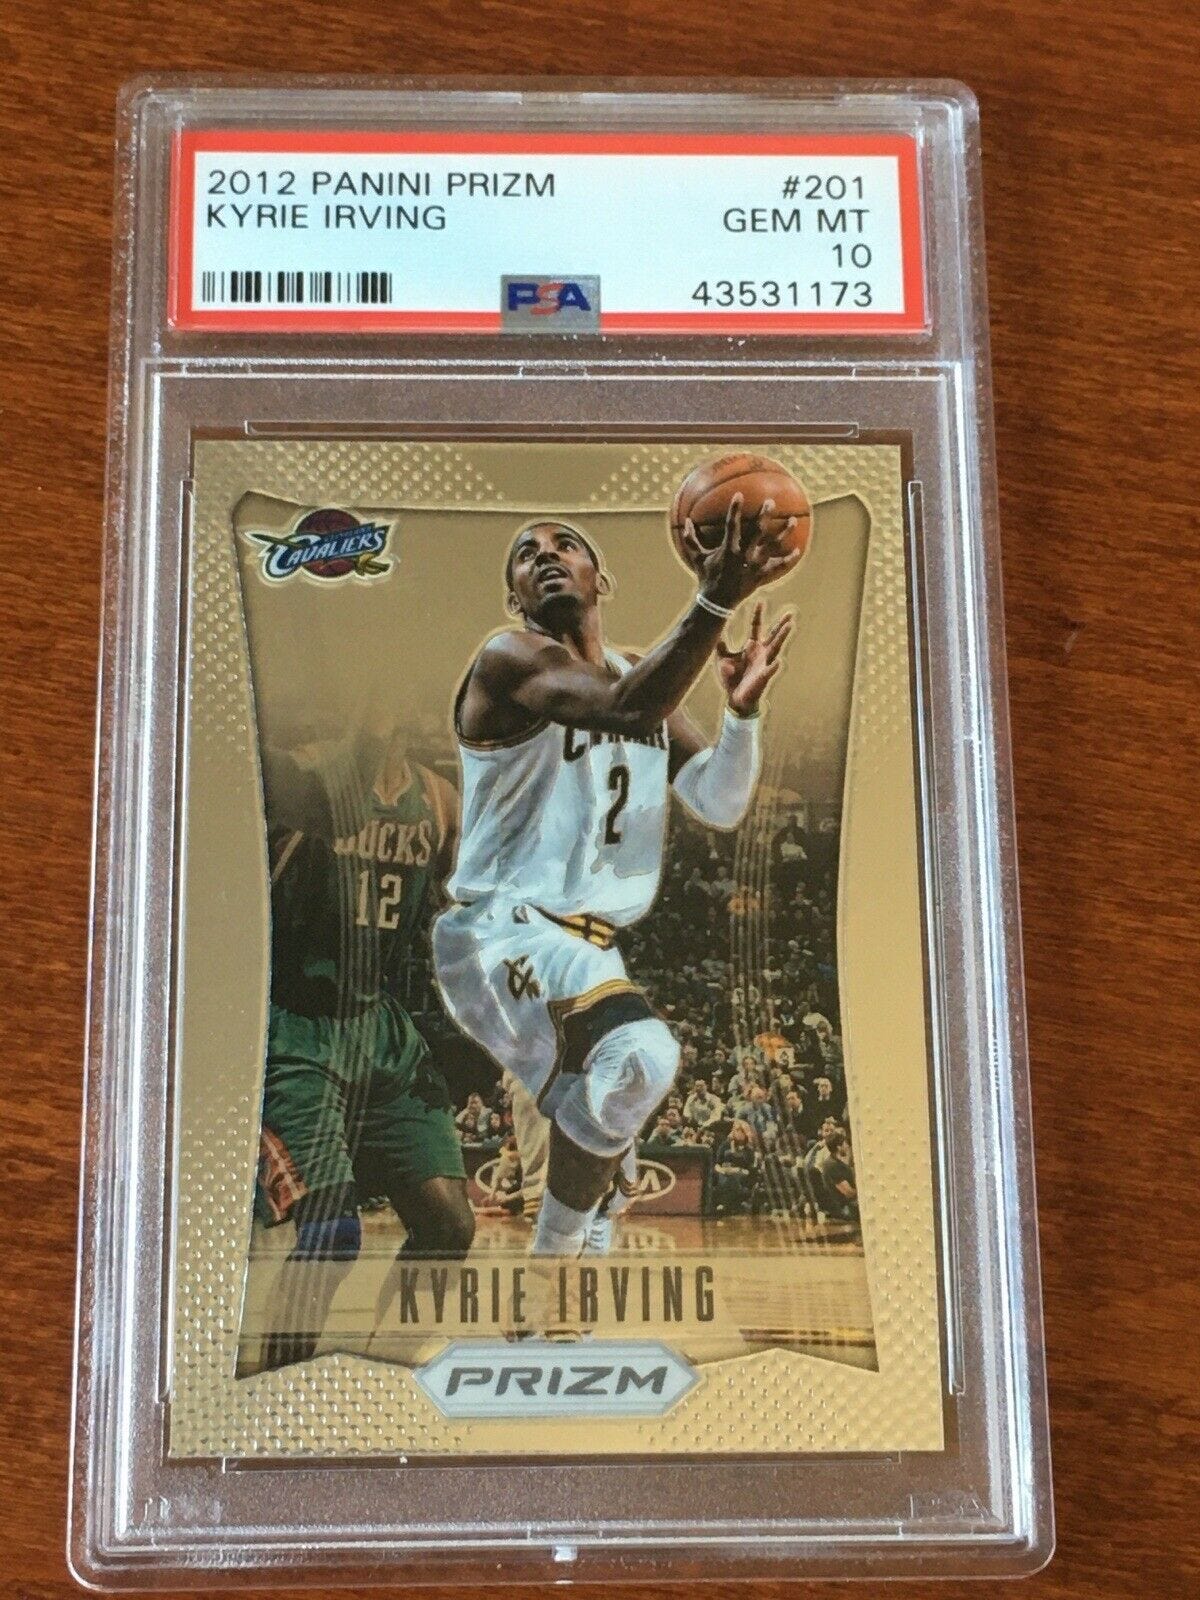 Image 1 - PSA 10 2012 Panini PRIZM KYRIE IRVING #201 RC rookie Great GEM MINT investment!